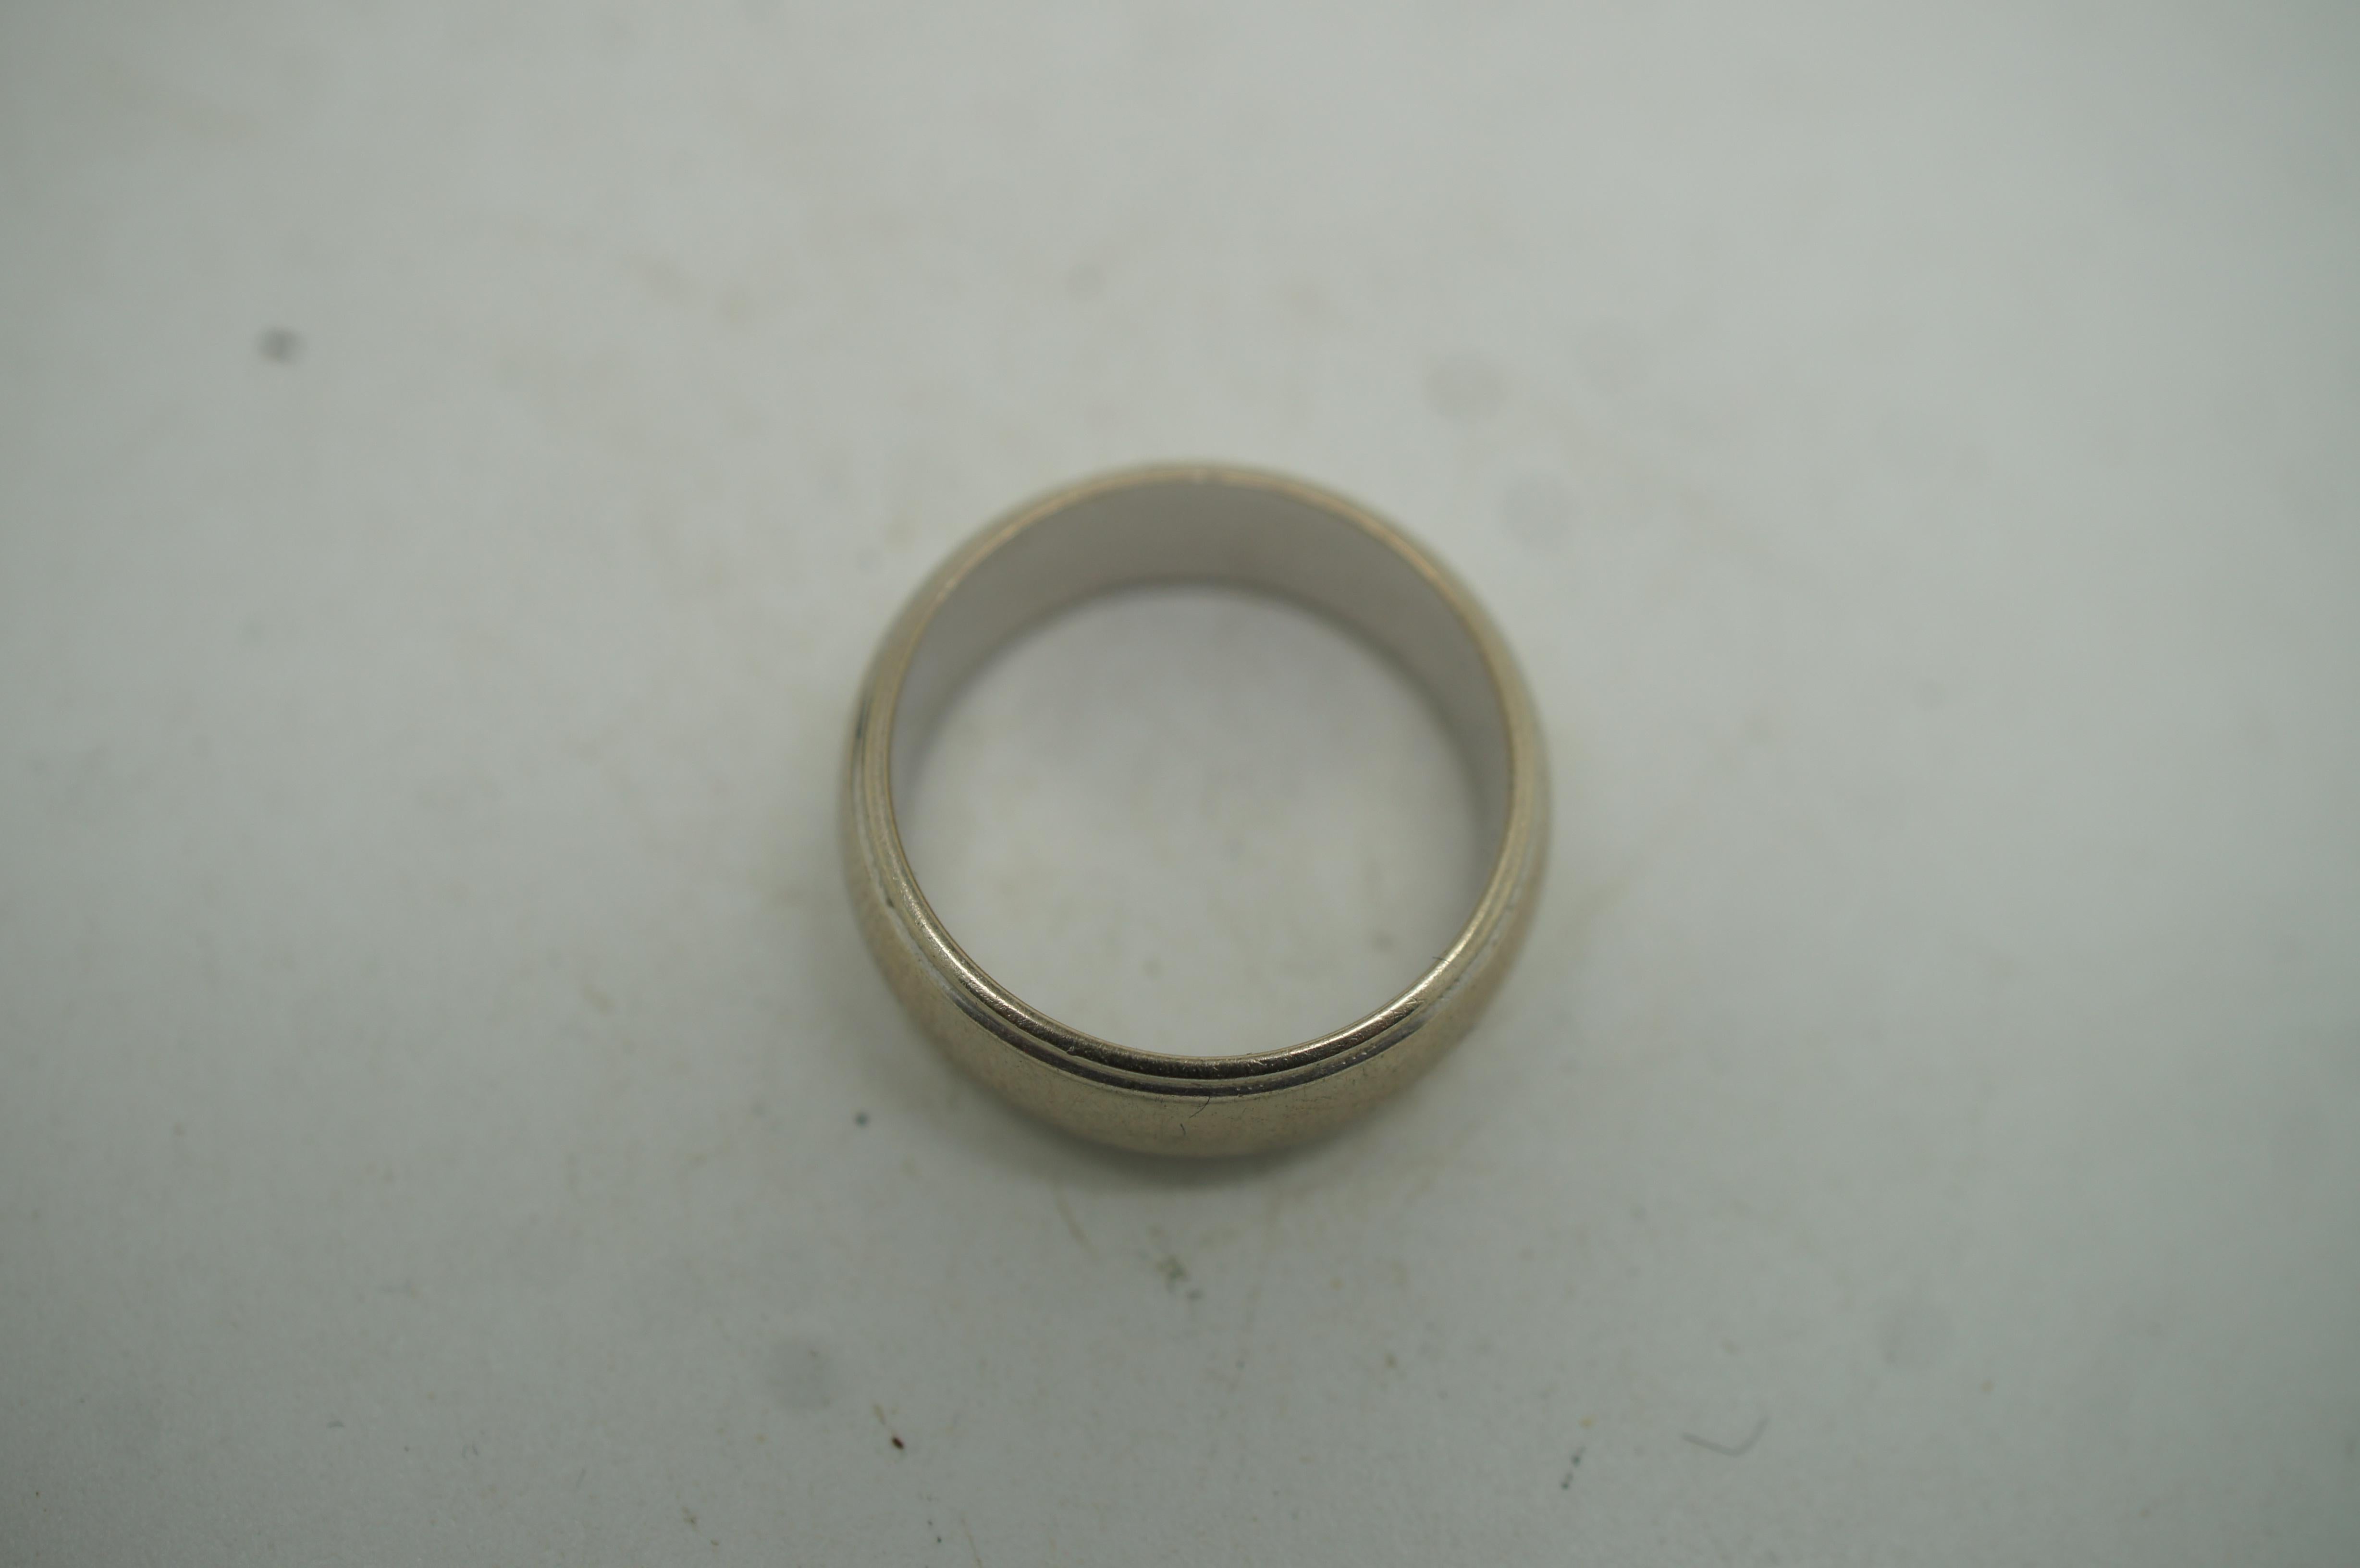 Vintage 14k White Gold Art Carved Thick Wedding Band Ring 7g Size 6  In Good Condition For Sale In Dayton, OH